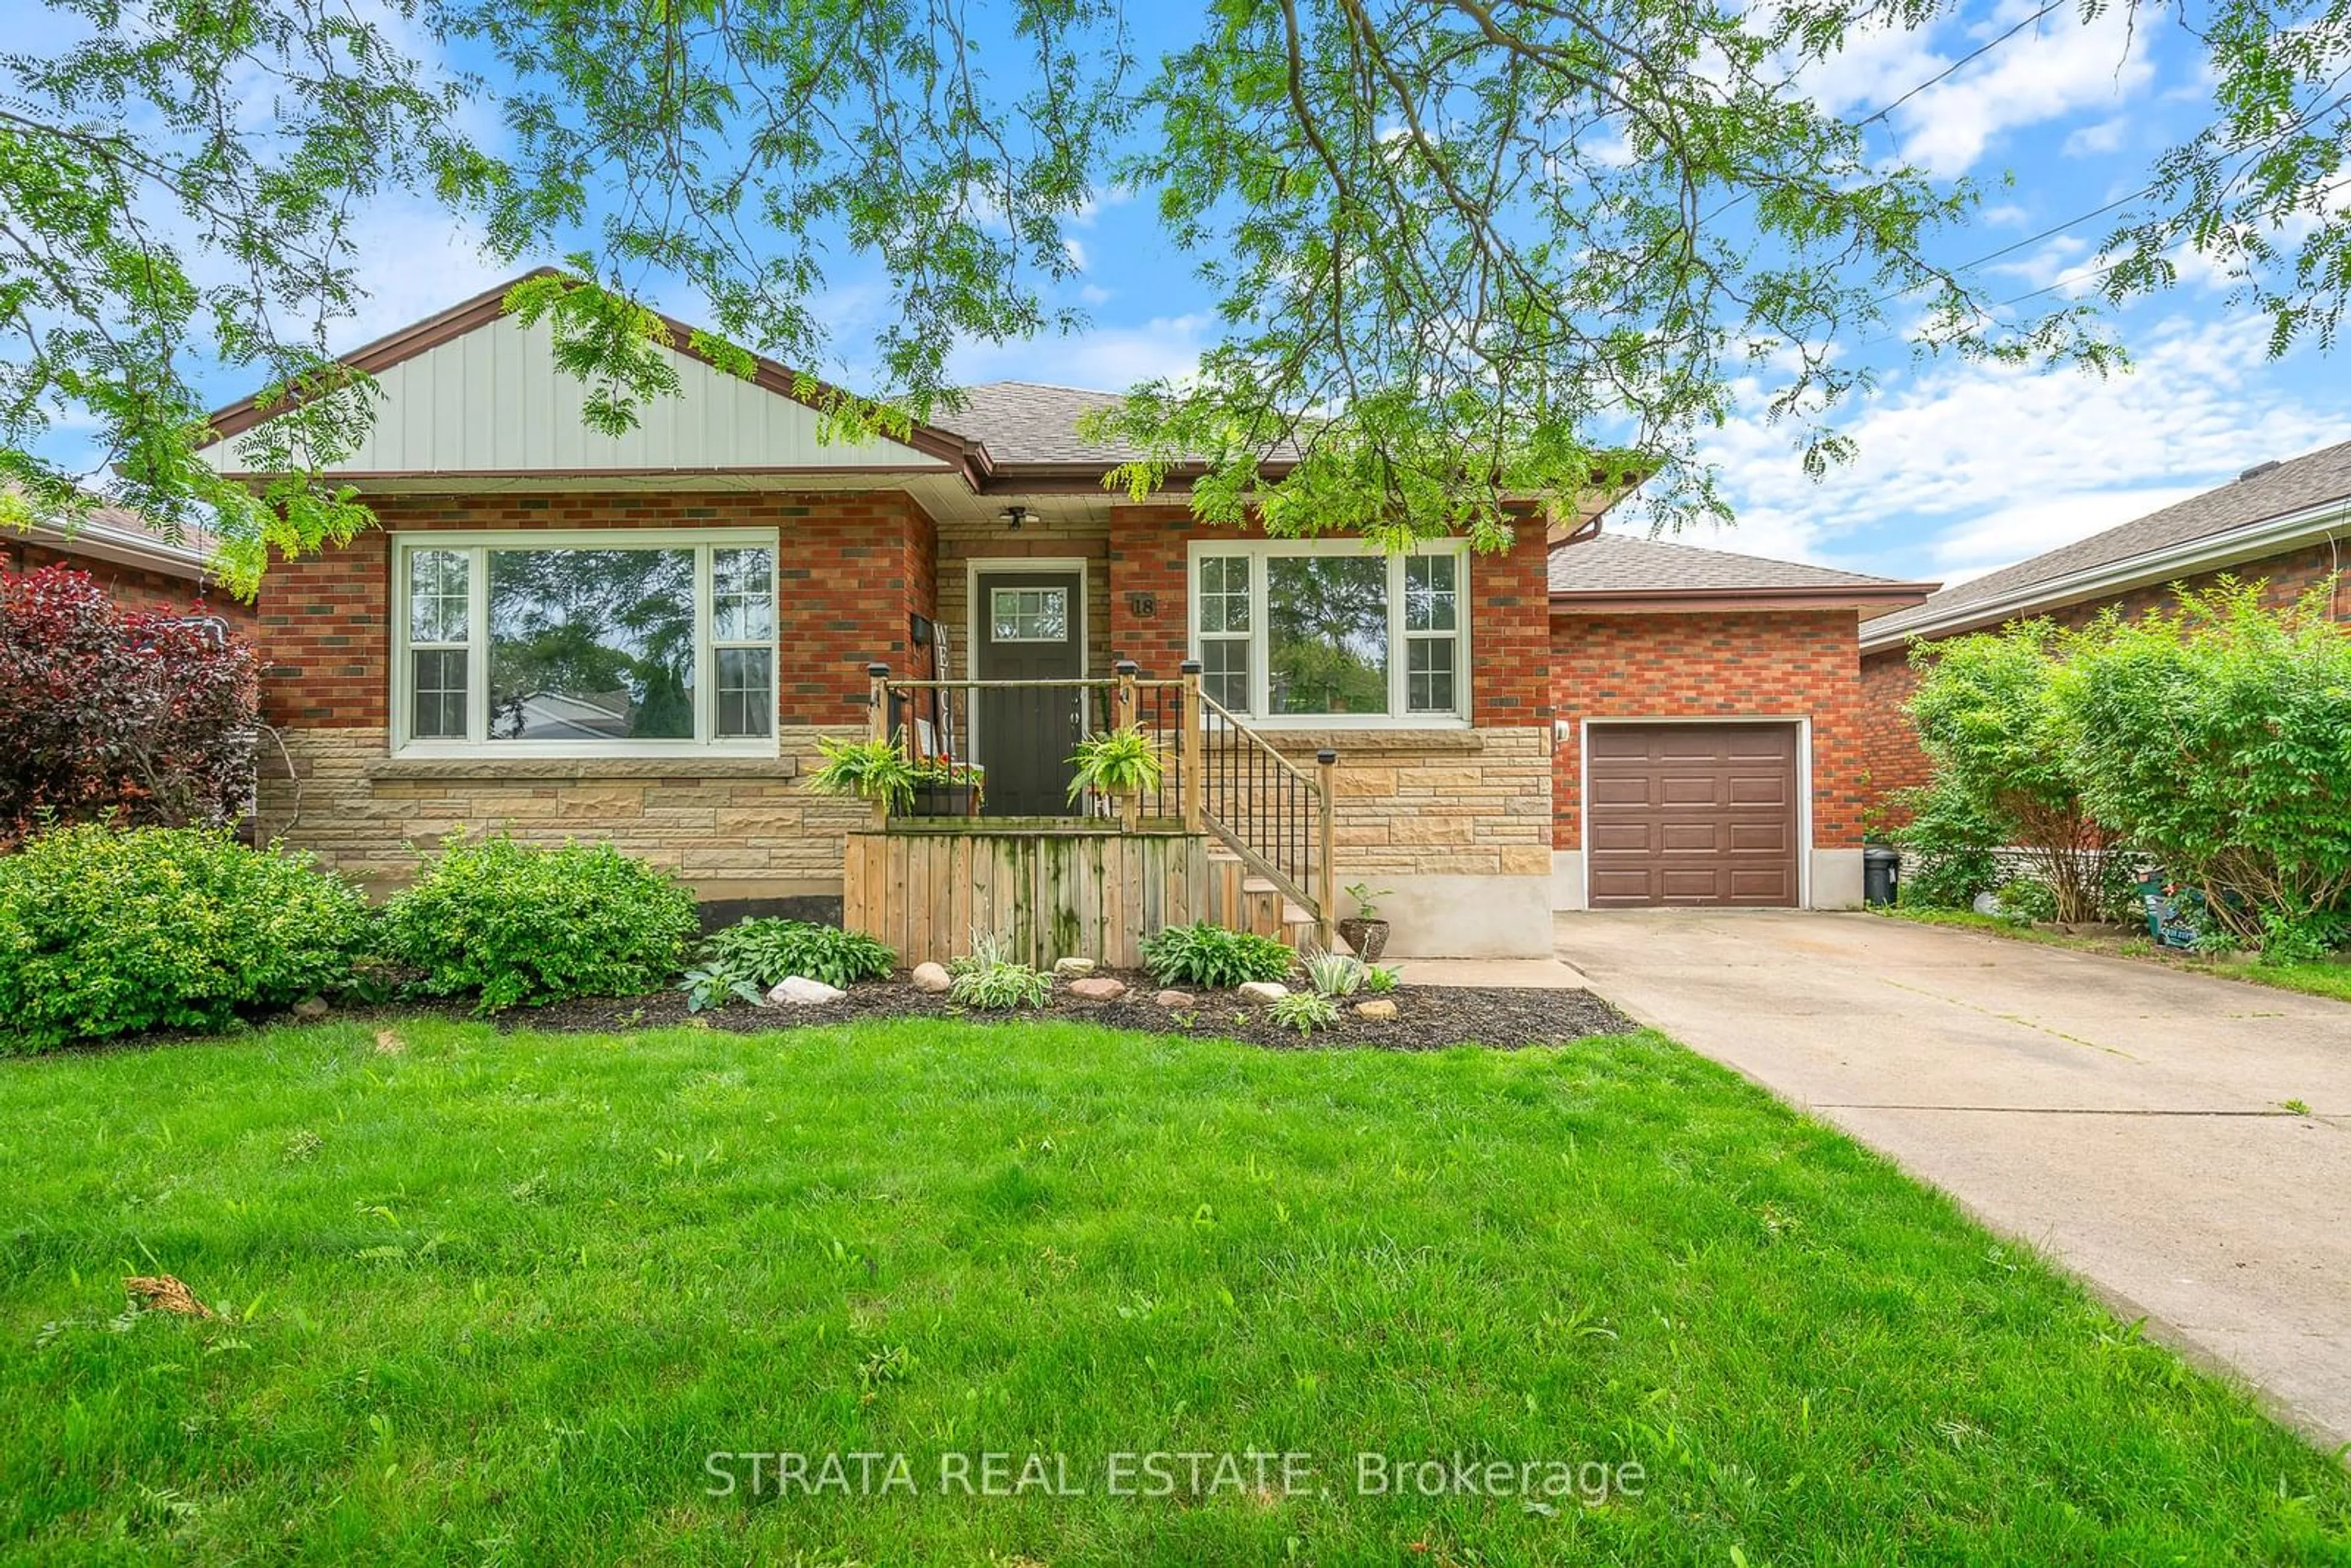 Home with brick exterior material for 18 Chalmers St, St. Catharines Ontario L2M 5C8